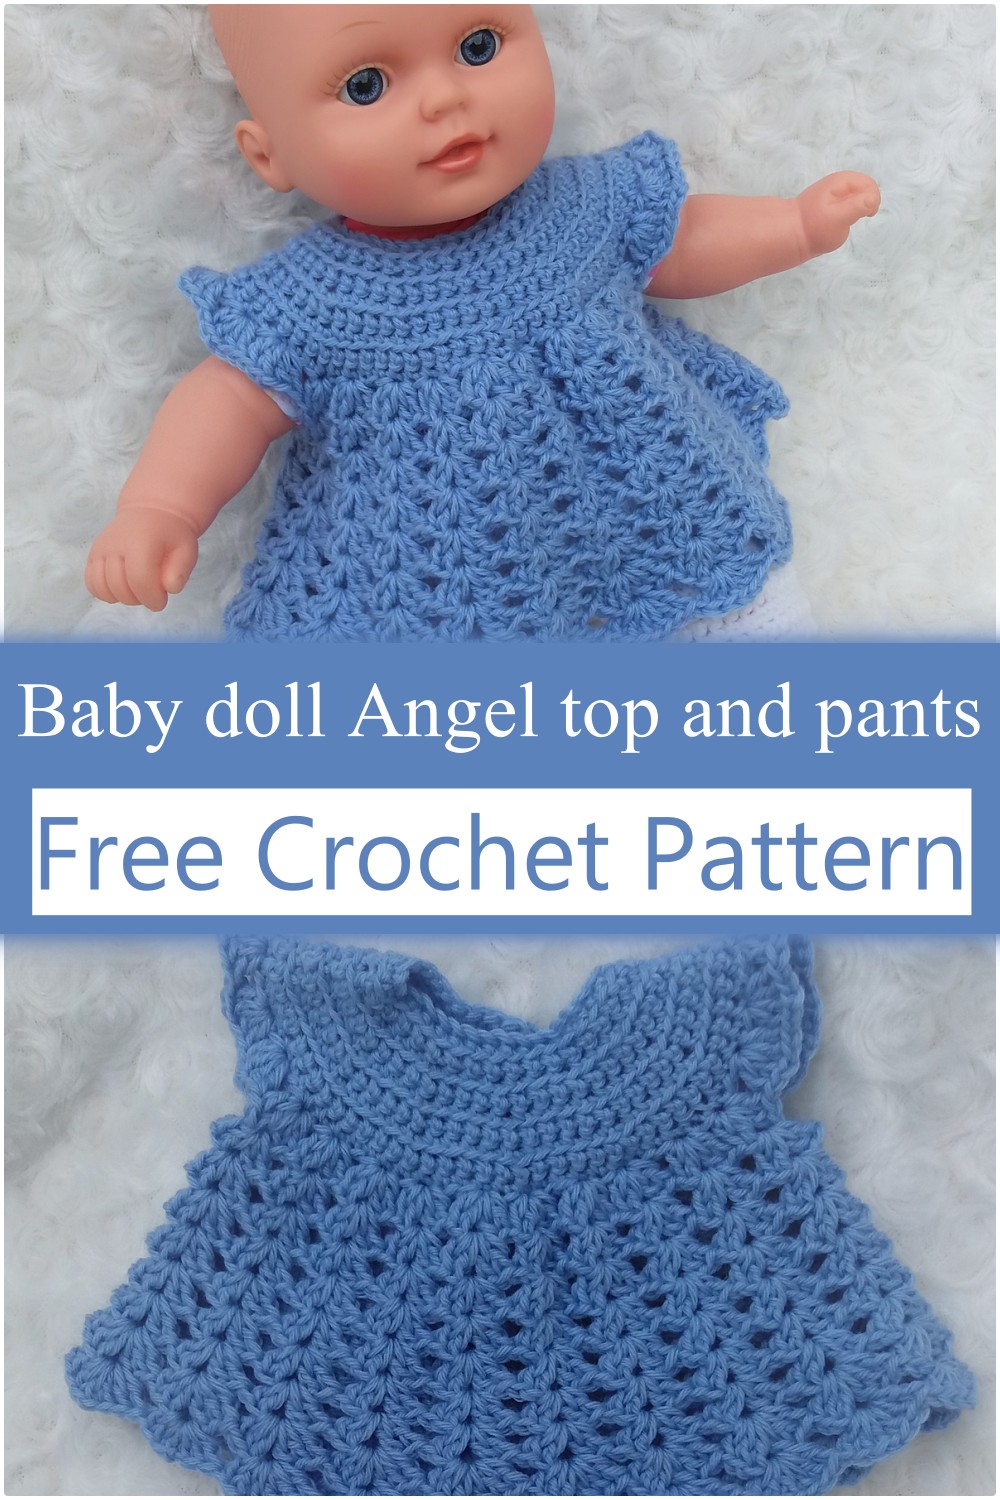 Baby doll Angel top and pants